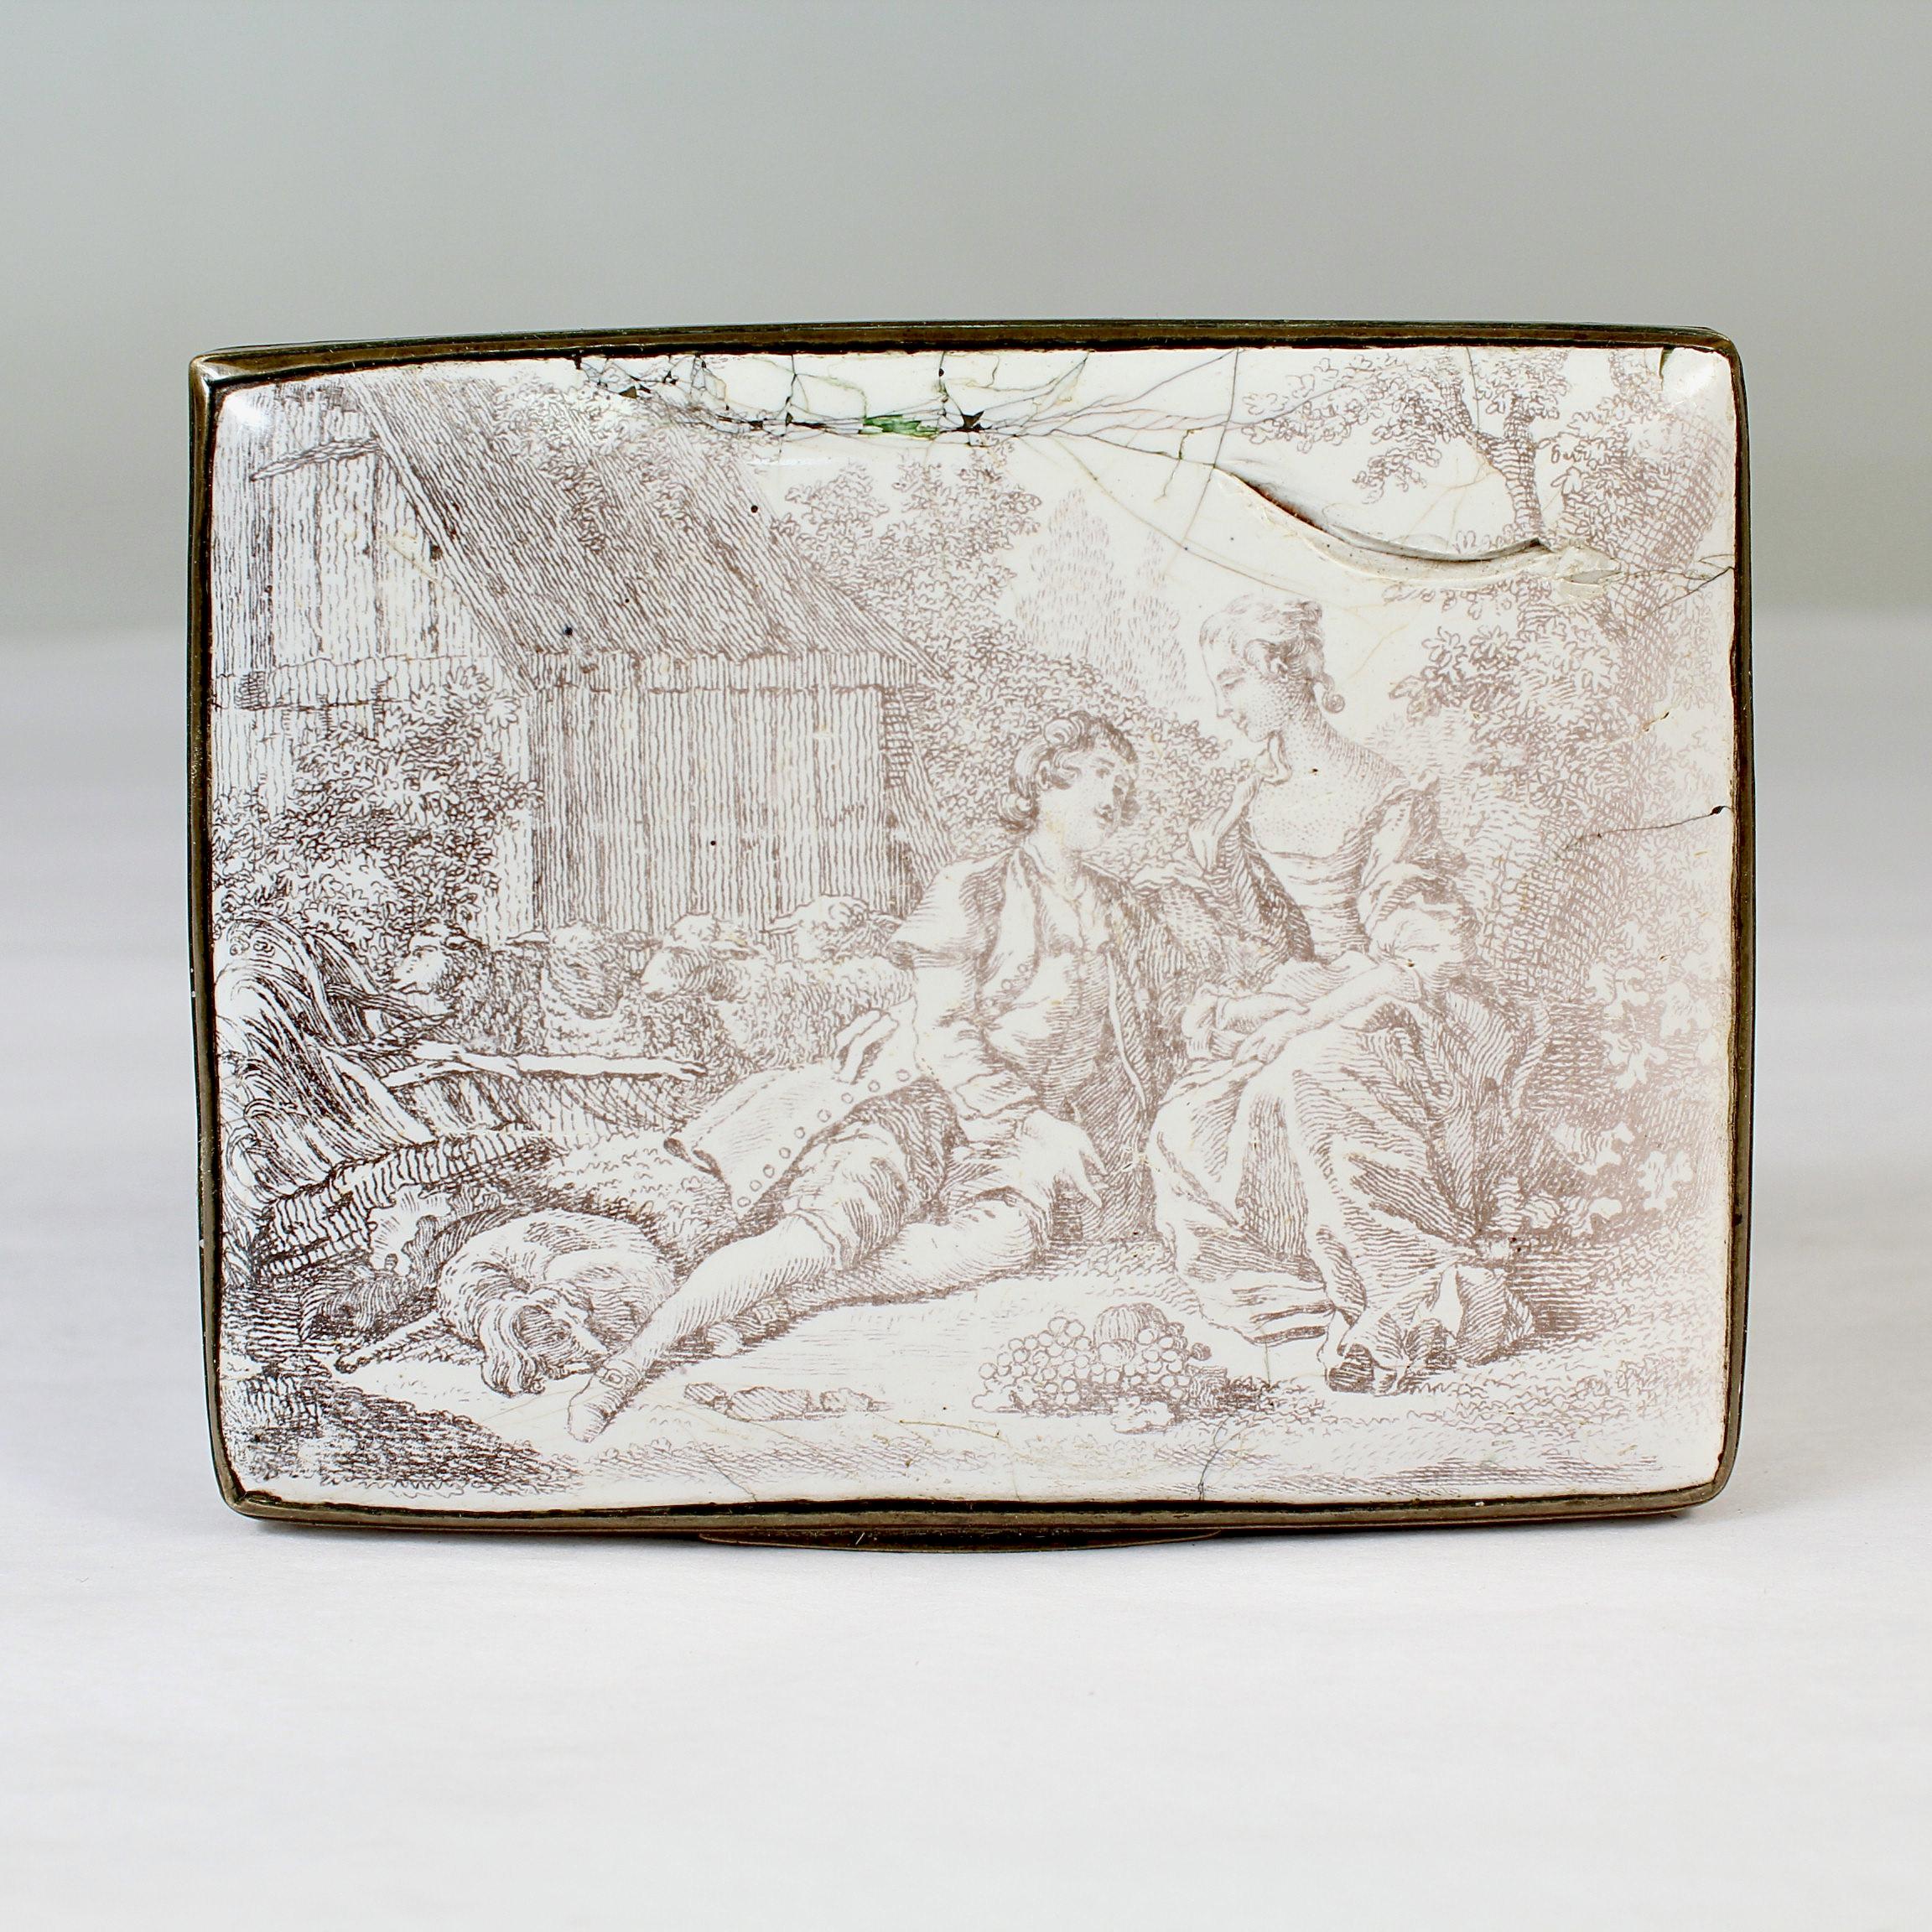 A fine antique 18th Century Battersea / Bilston bonbonniere or snuff box. 

With a white ground and grisaille transfer decoration throughout. 
 
The top depicts an idyllic scene of a man lounging next to a woman in a garden accompanied by sheep